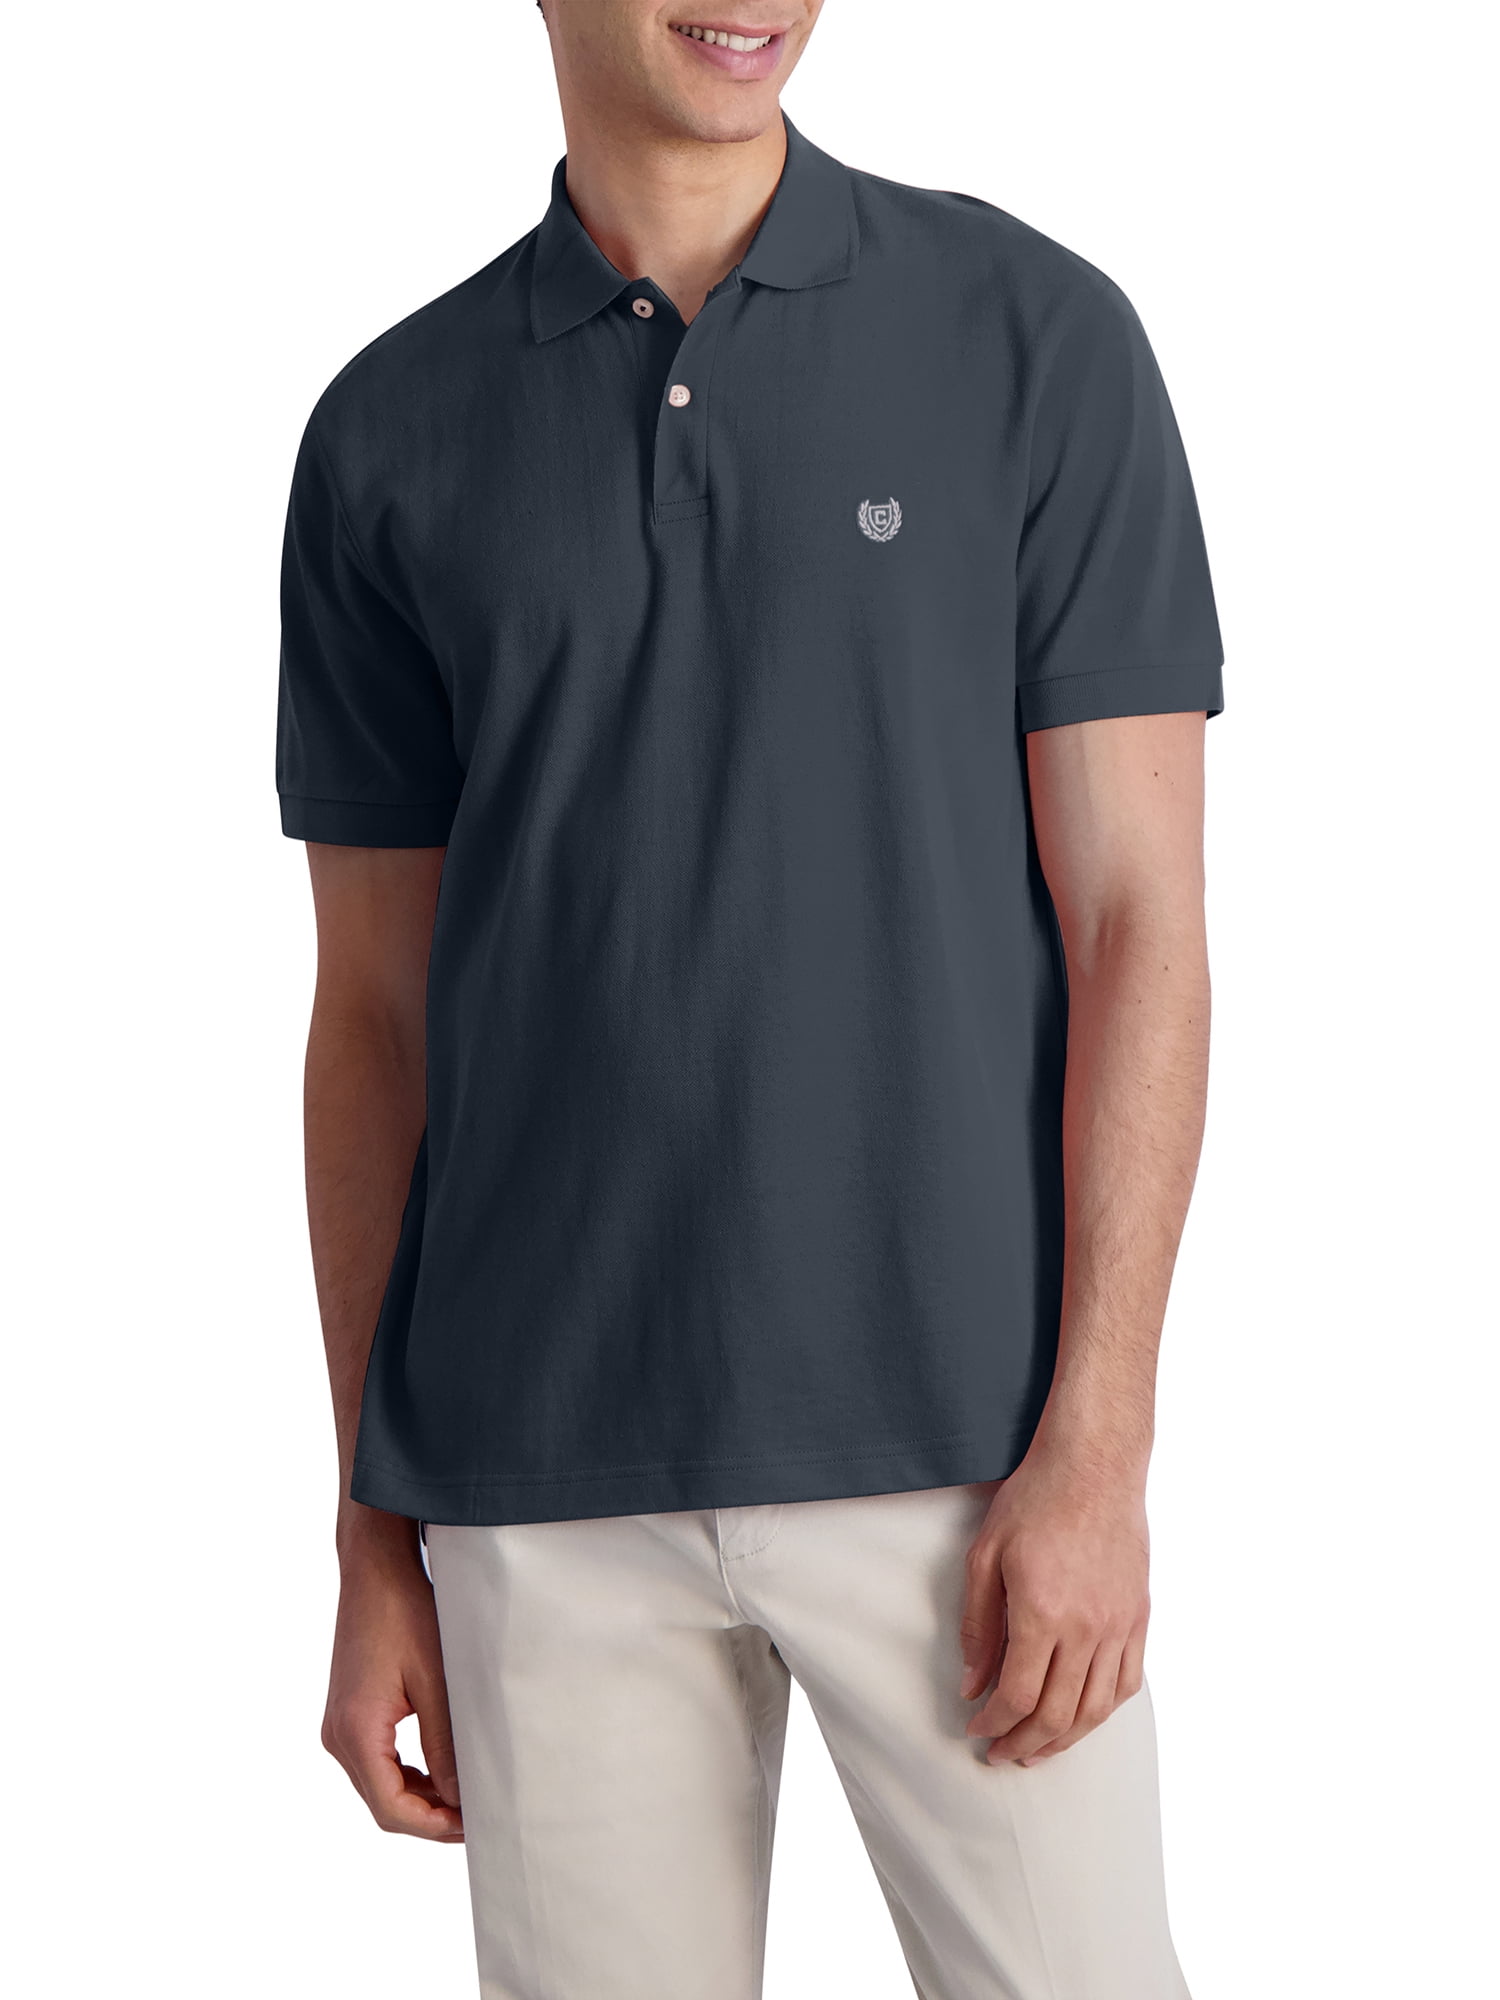 Chaps Men's Classic Fit Short Sleeve Cotton Everyday Solid Pique Polo Shirt  